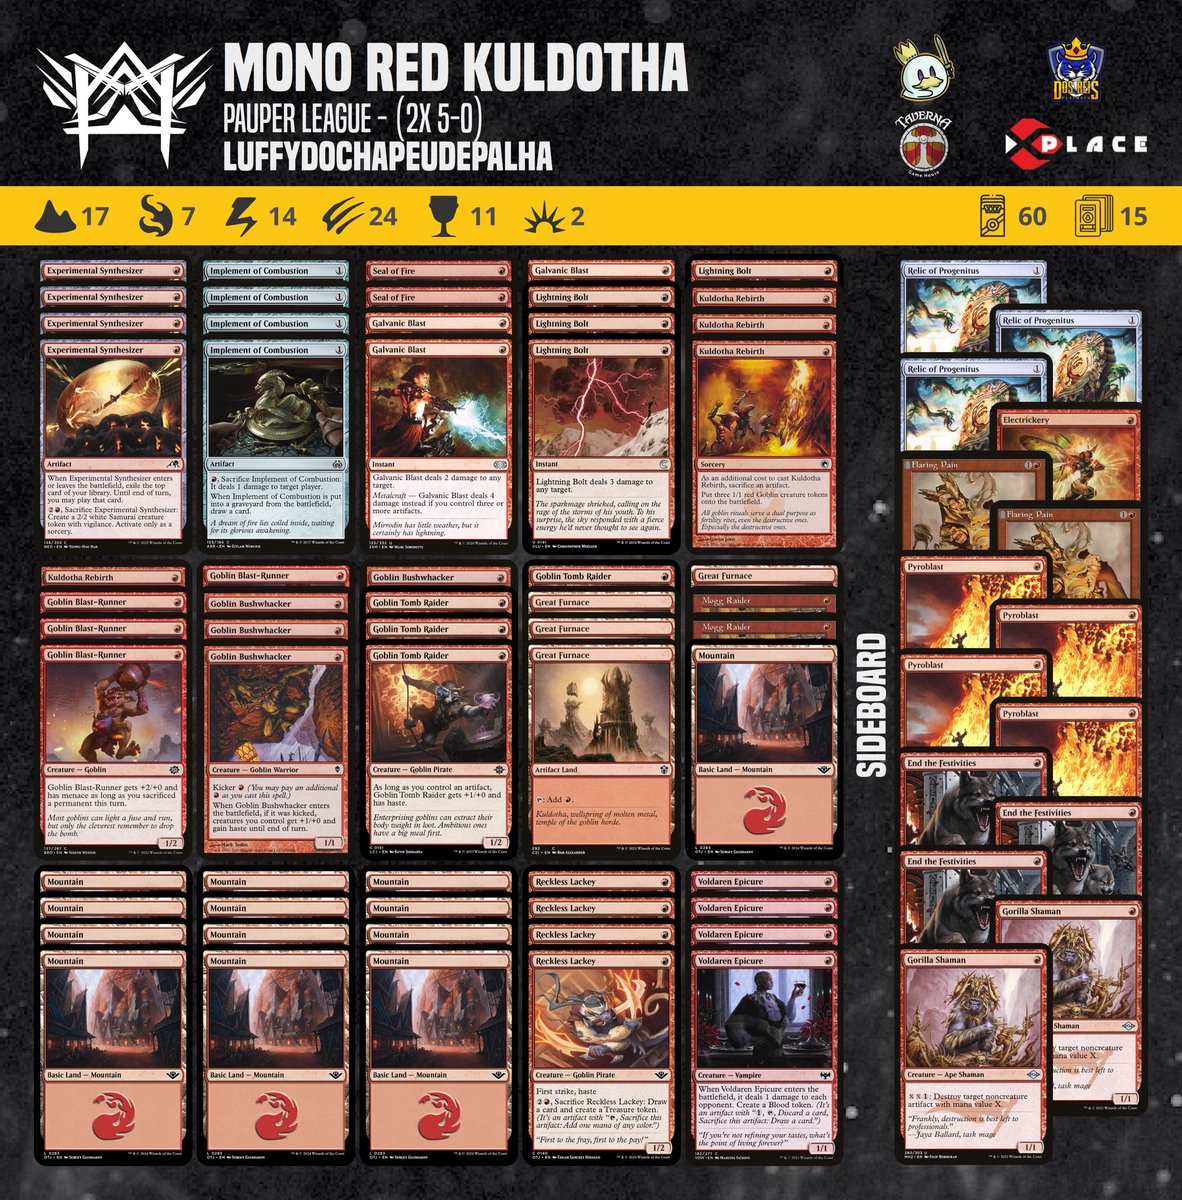 Our athlete @GabrielLuffyDCP achieved a 2x 5-0 in the Pauper League tournament with this Mono Red Kuldotha decklist.

#pauper  #magic #mtgcommon #metagamepauper #mtgpauper #magicthegathering #wizardsofthecoast 

@PauperDecklists @fireshoes